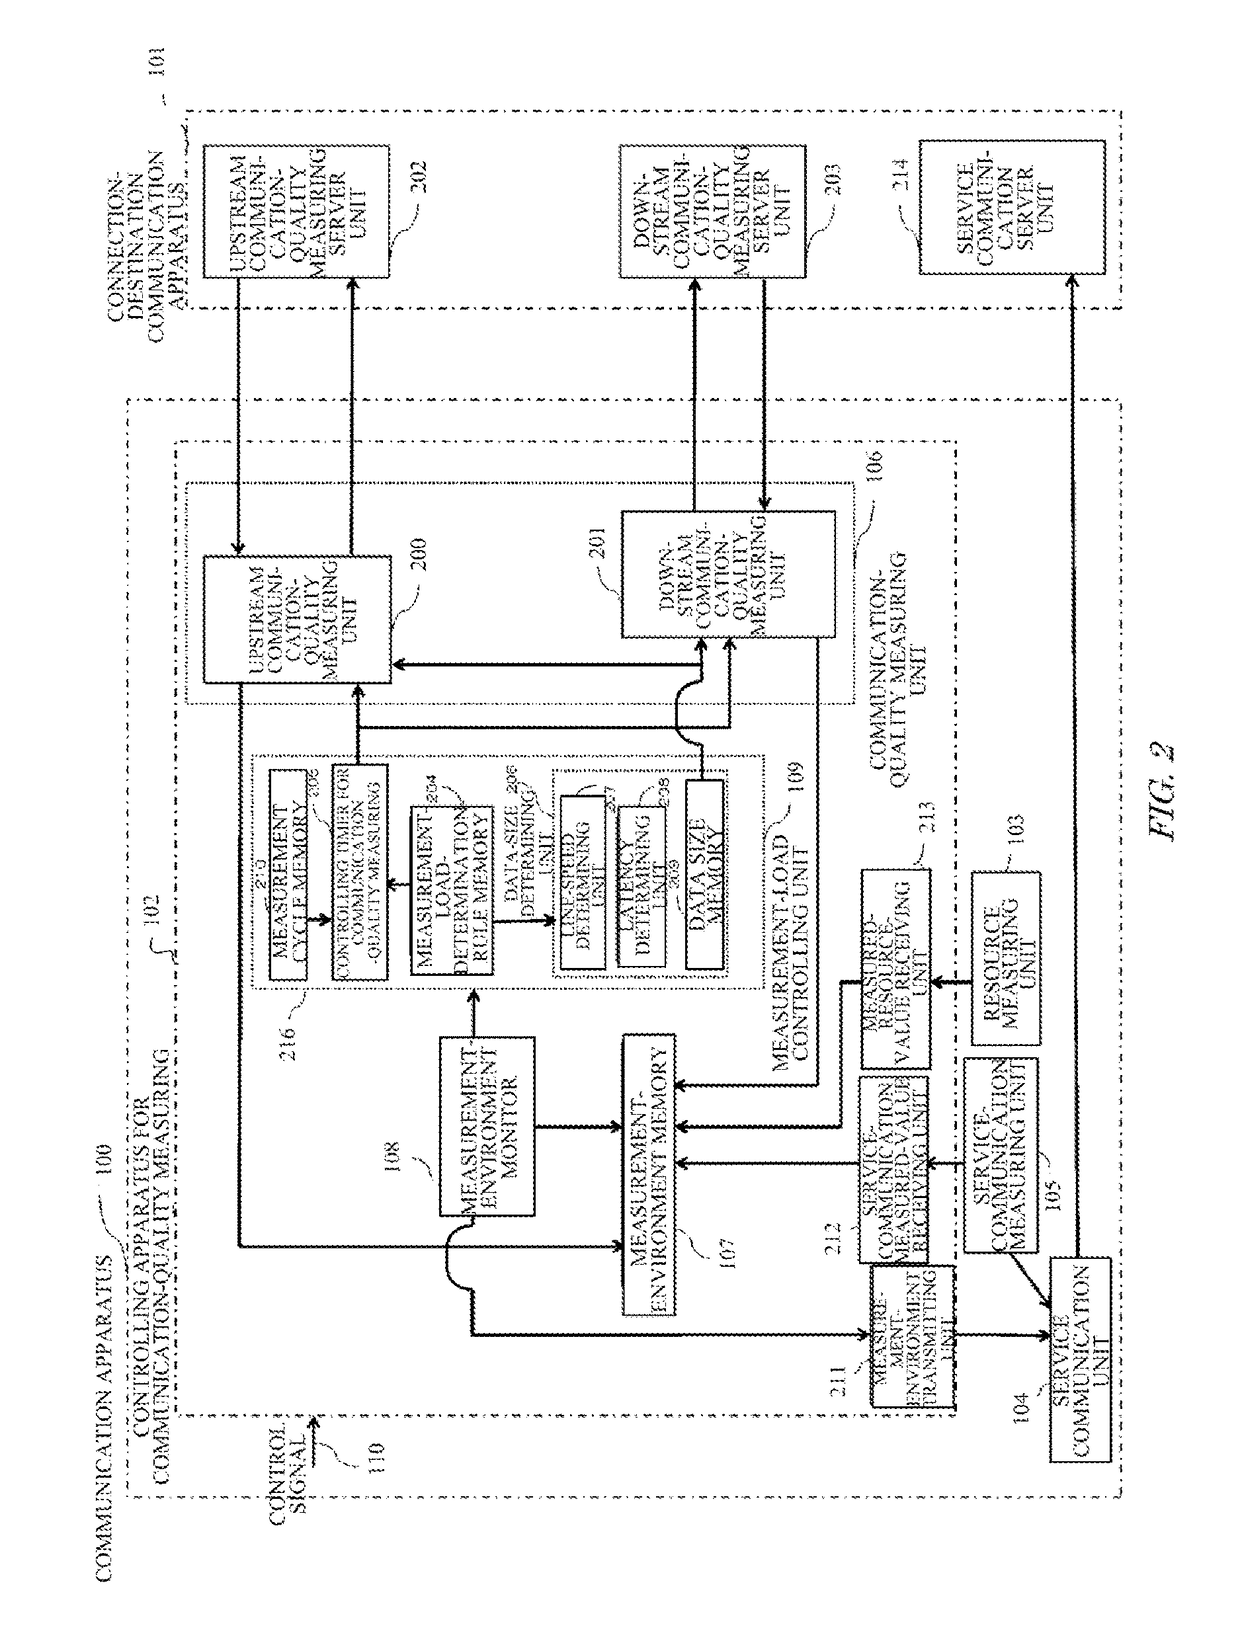 Controlling apparatus for communication-quality measuring, communication apparatus, and program